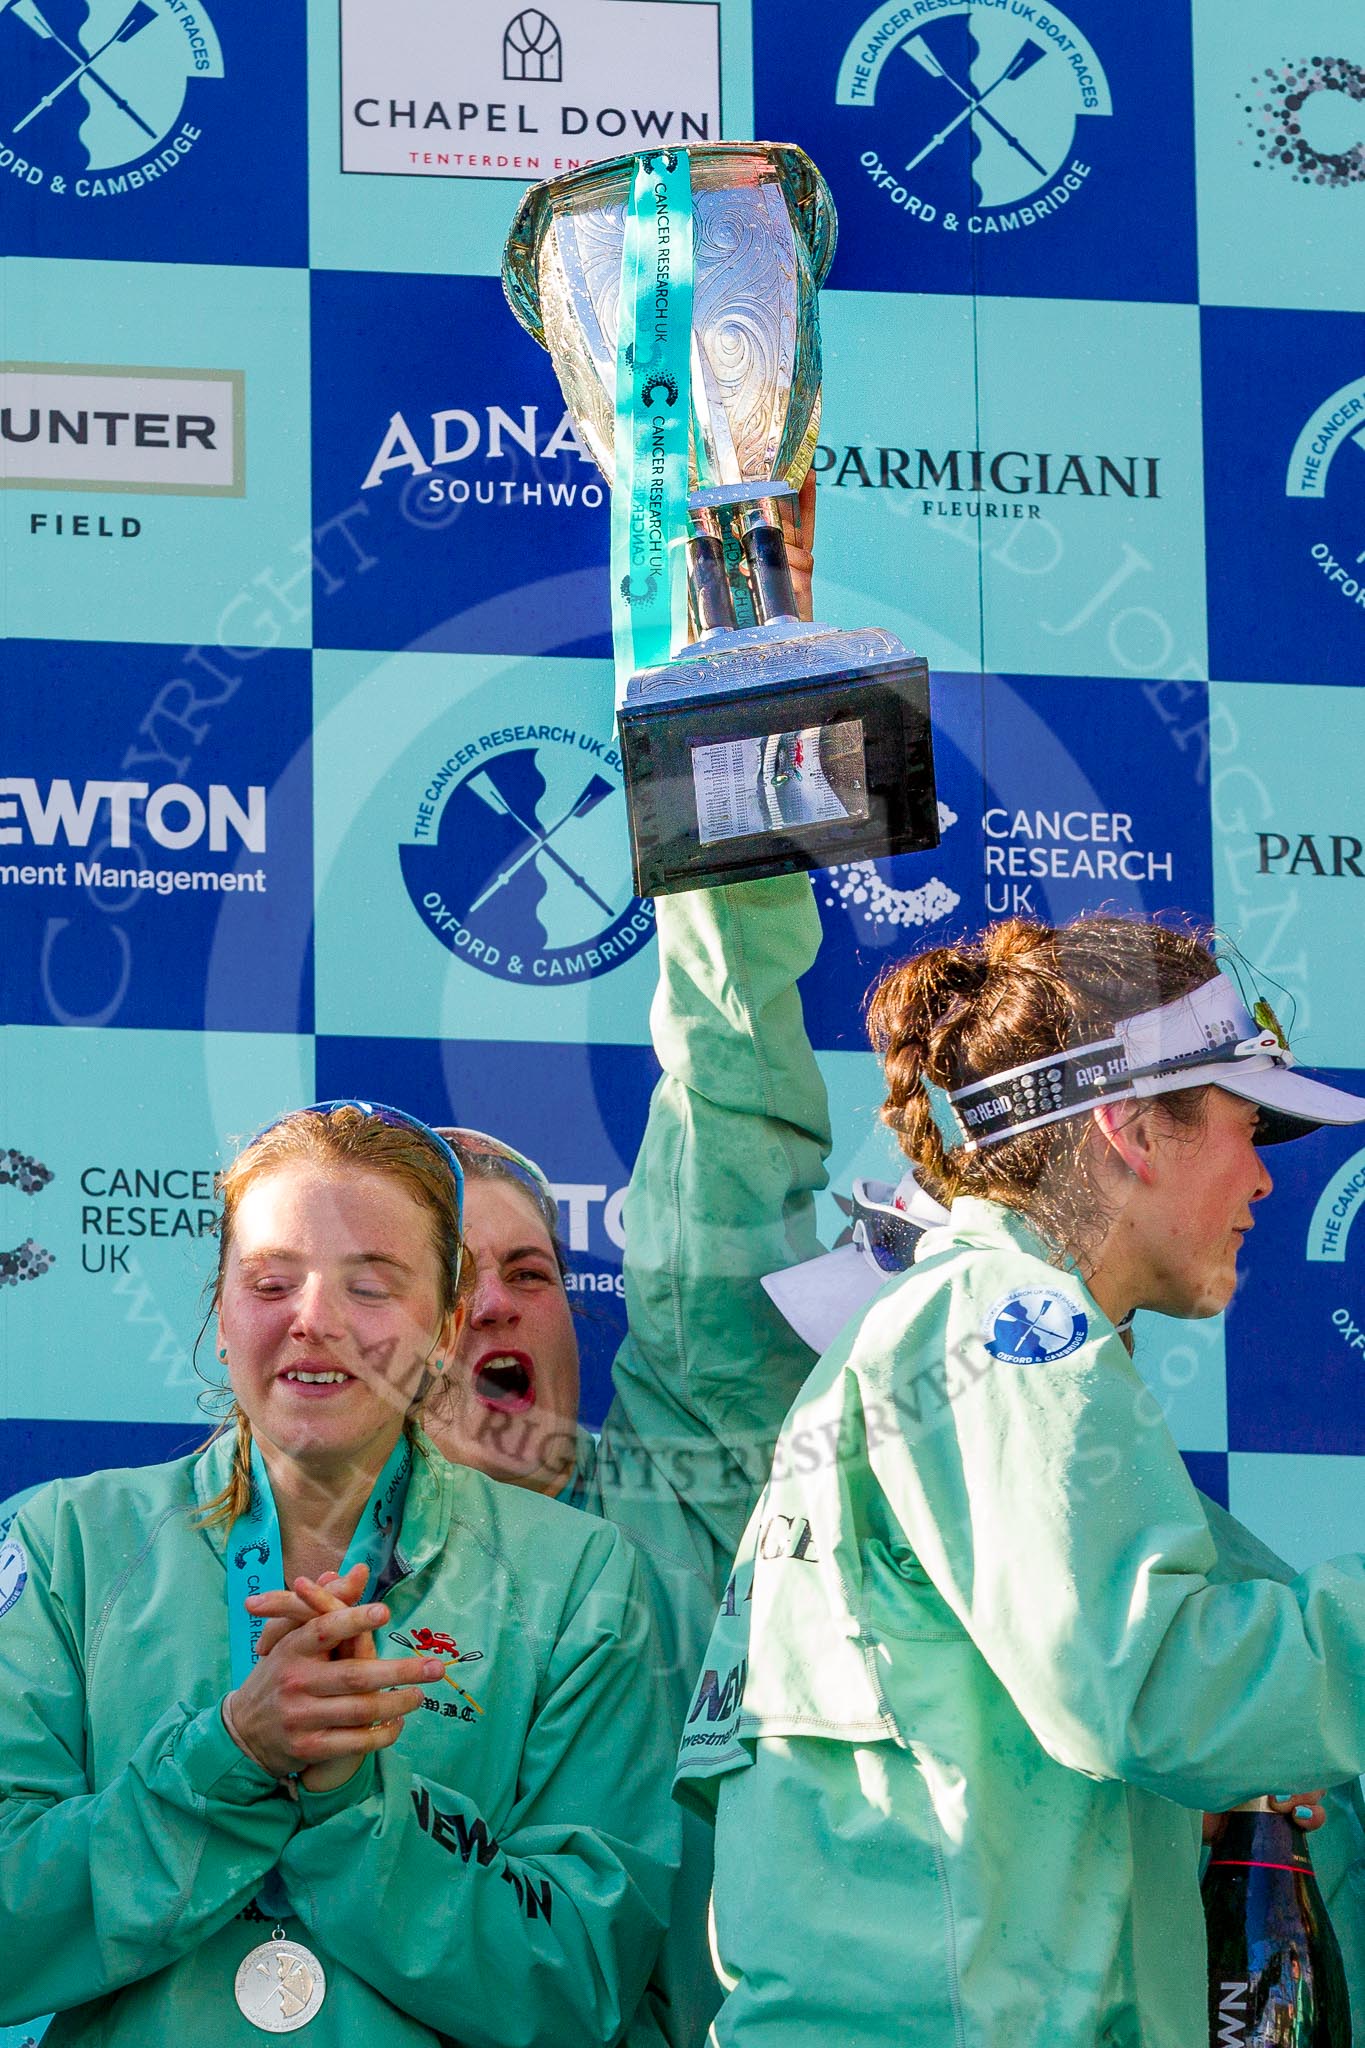 The Boat Race season 2017 -  The Cancer Research Women's Boat Race: CUWBC after the Chanpange spraying at the price giving, with the Women's Boat Race trophy. Alice White, and Claire Lambe with th etrophy.
River Thames between Putney Bridge and Mortlake,
London SW15,

United Kingdom,
on 02 April 2017 at 17:13, image #292